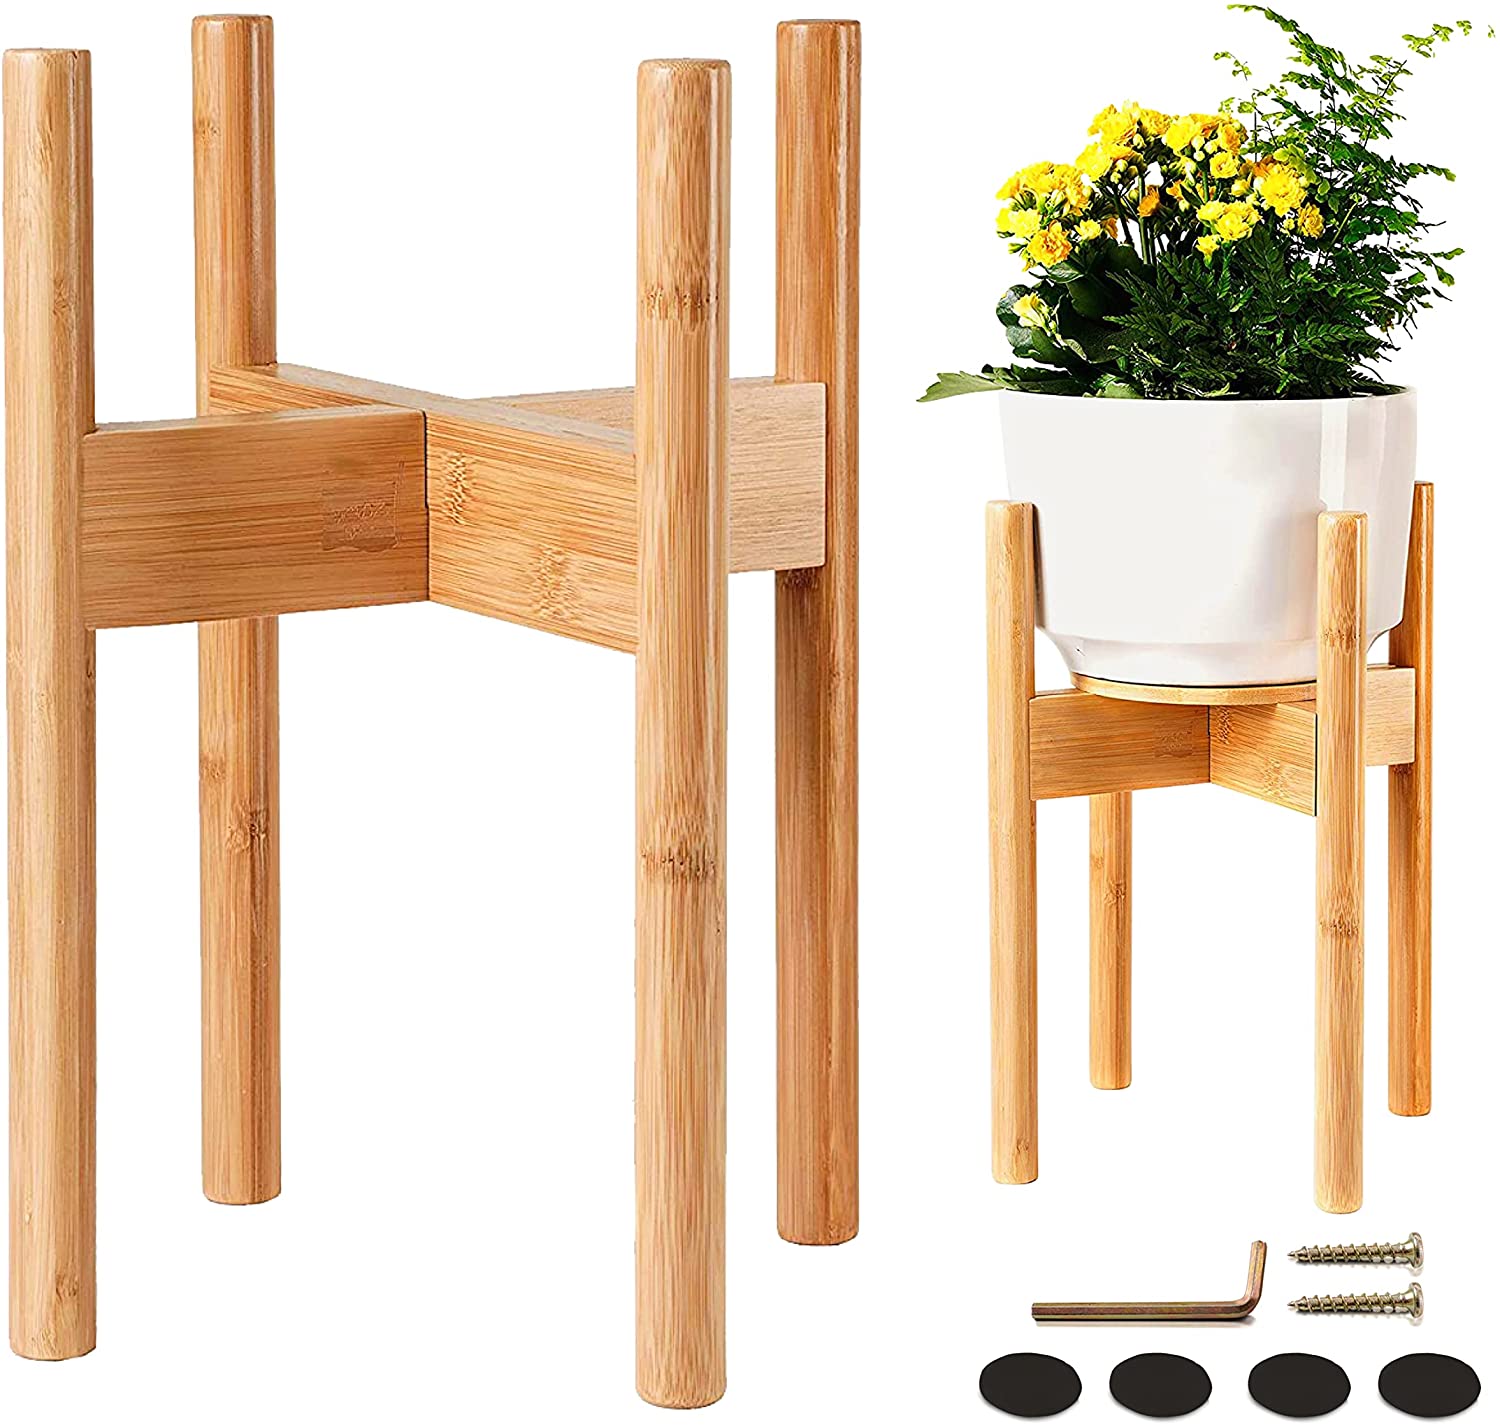 5. ZPirates Bamboo Wood House Plant and Flower Planter Holder